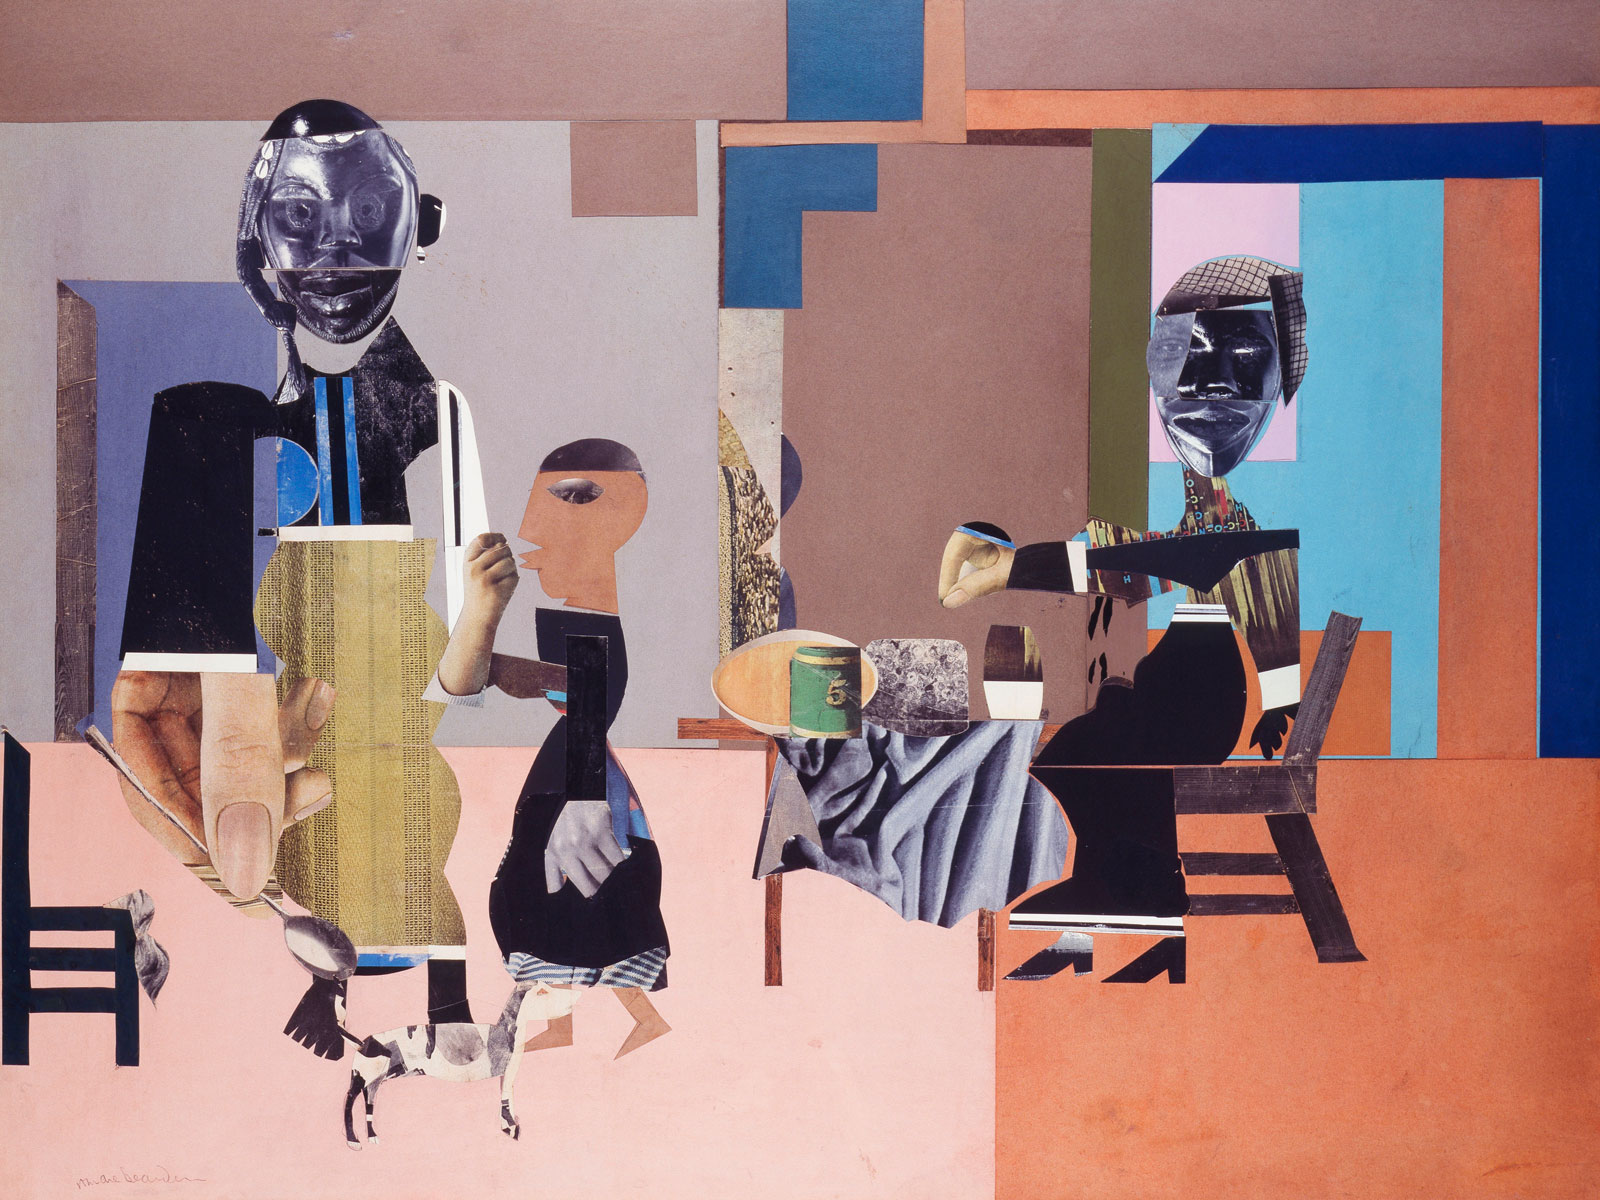 A collage showing a person at a table and two standing, in peach, pink, blues, and purples